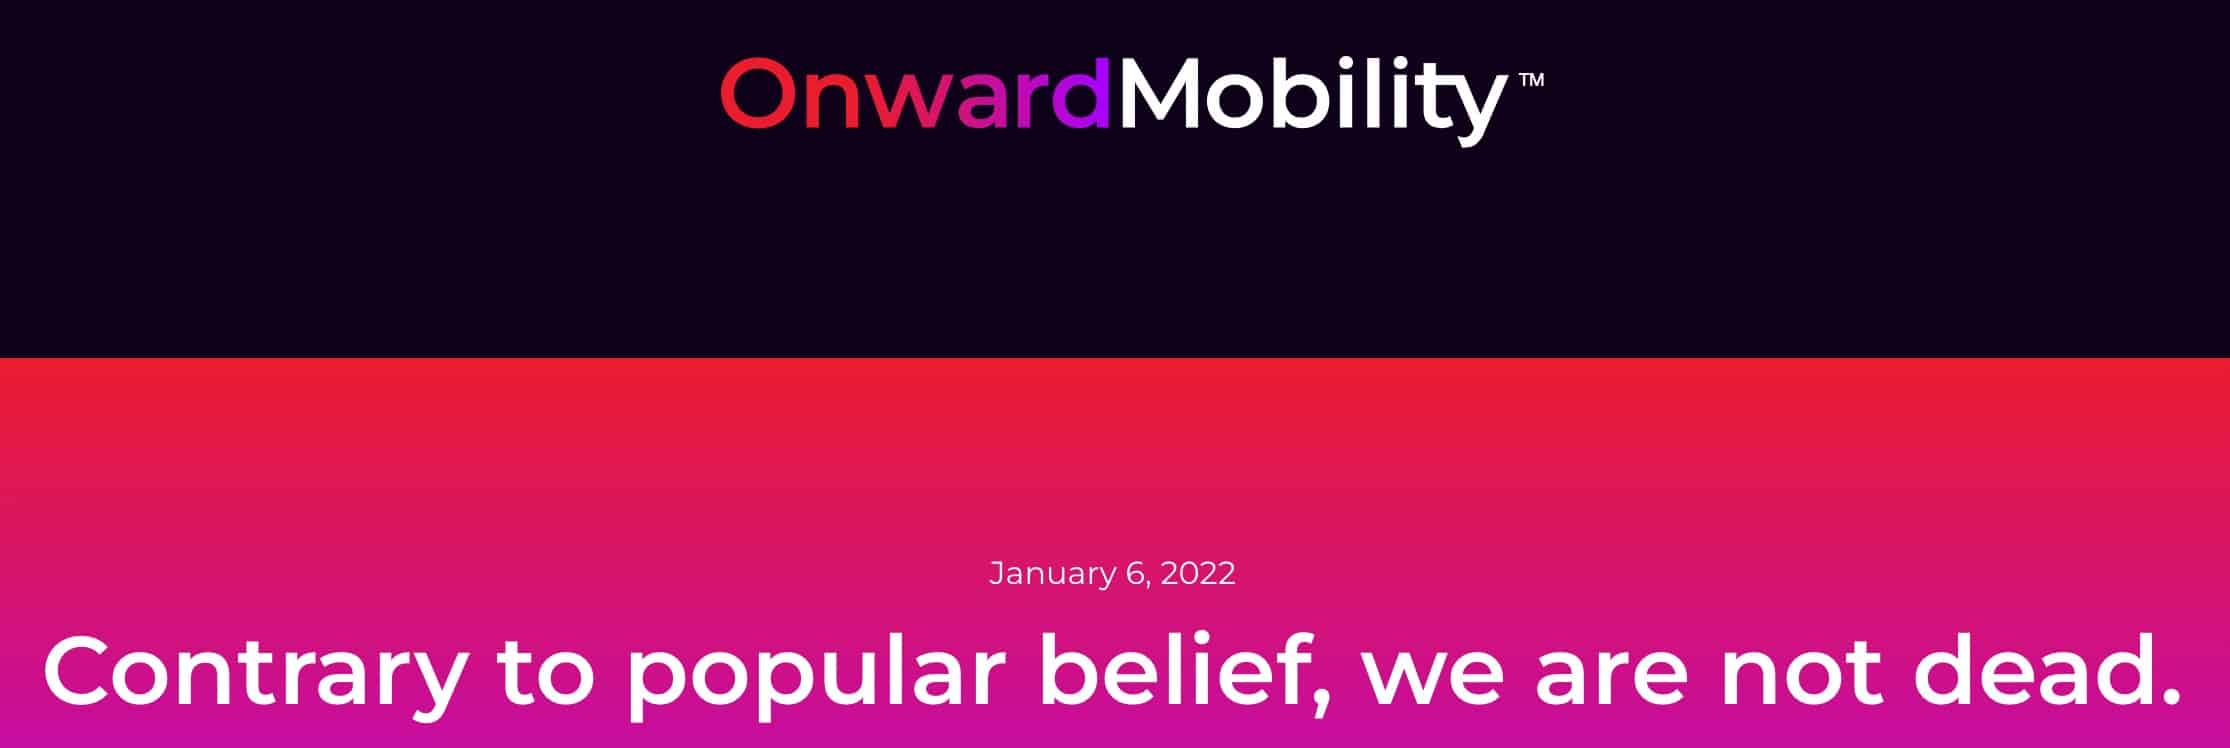 OnwardMobility 5G Blackberry - We Are Not Dead